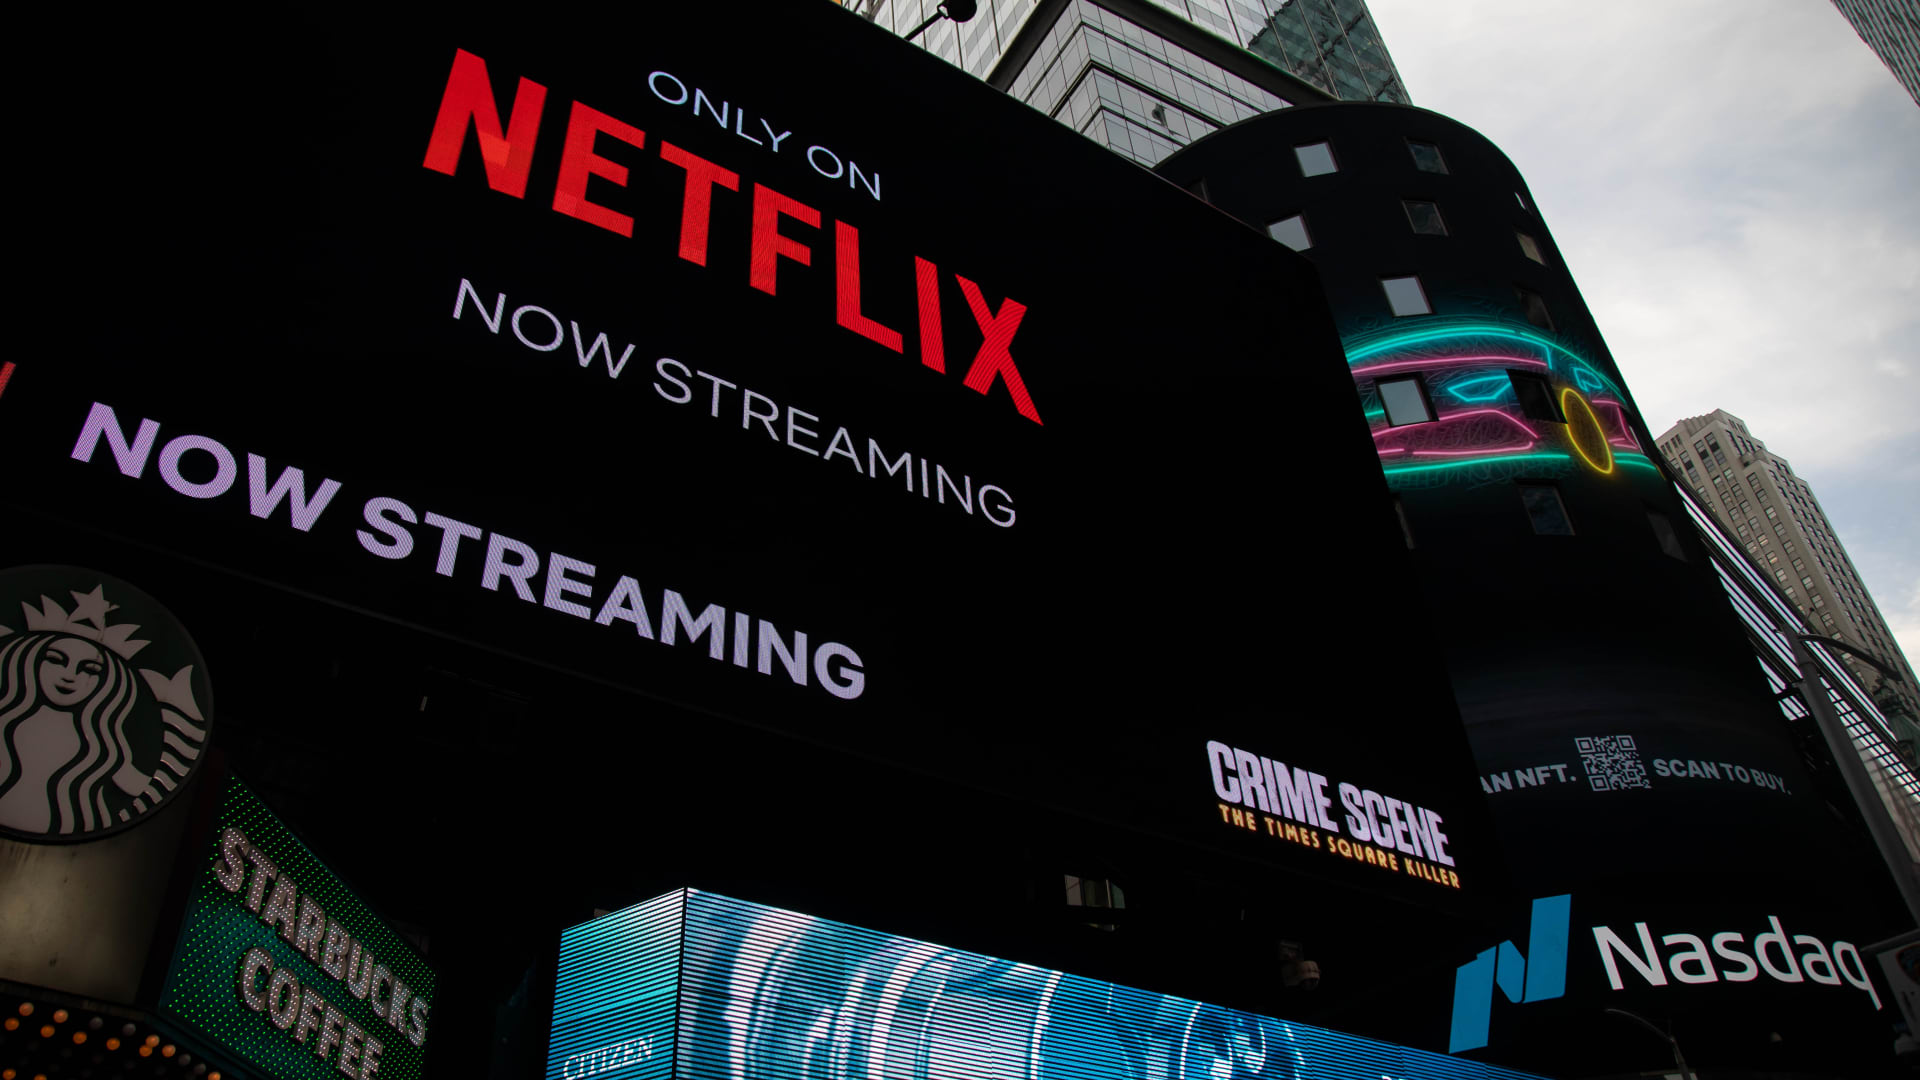 Netflix, United Airlines, Adobe and more